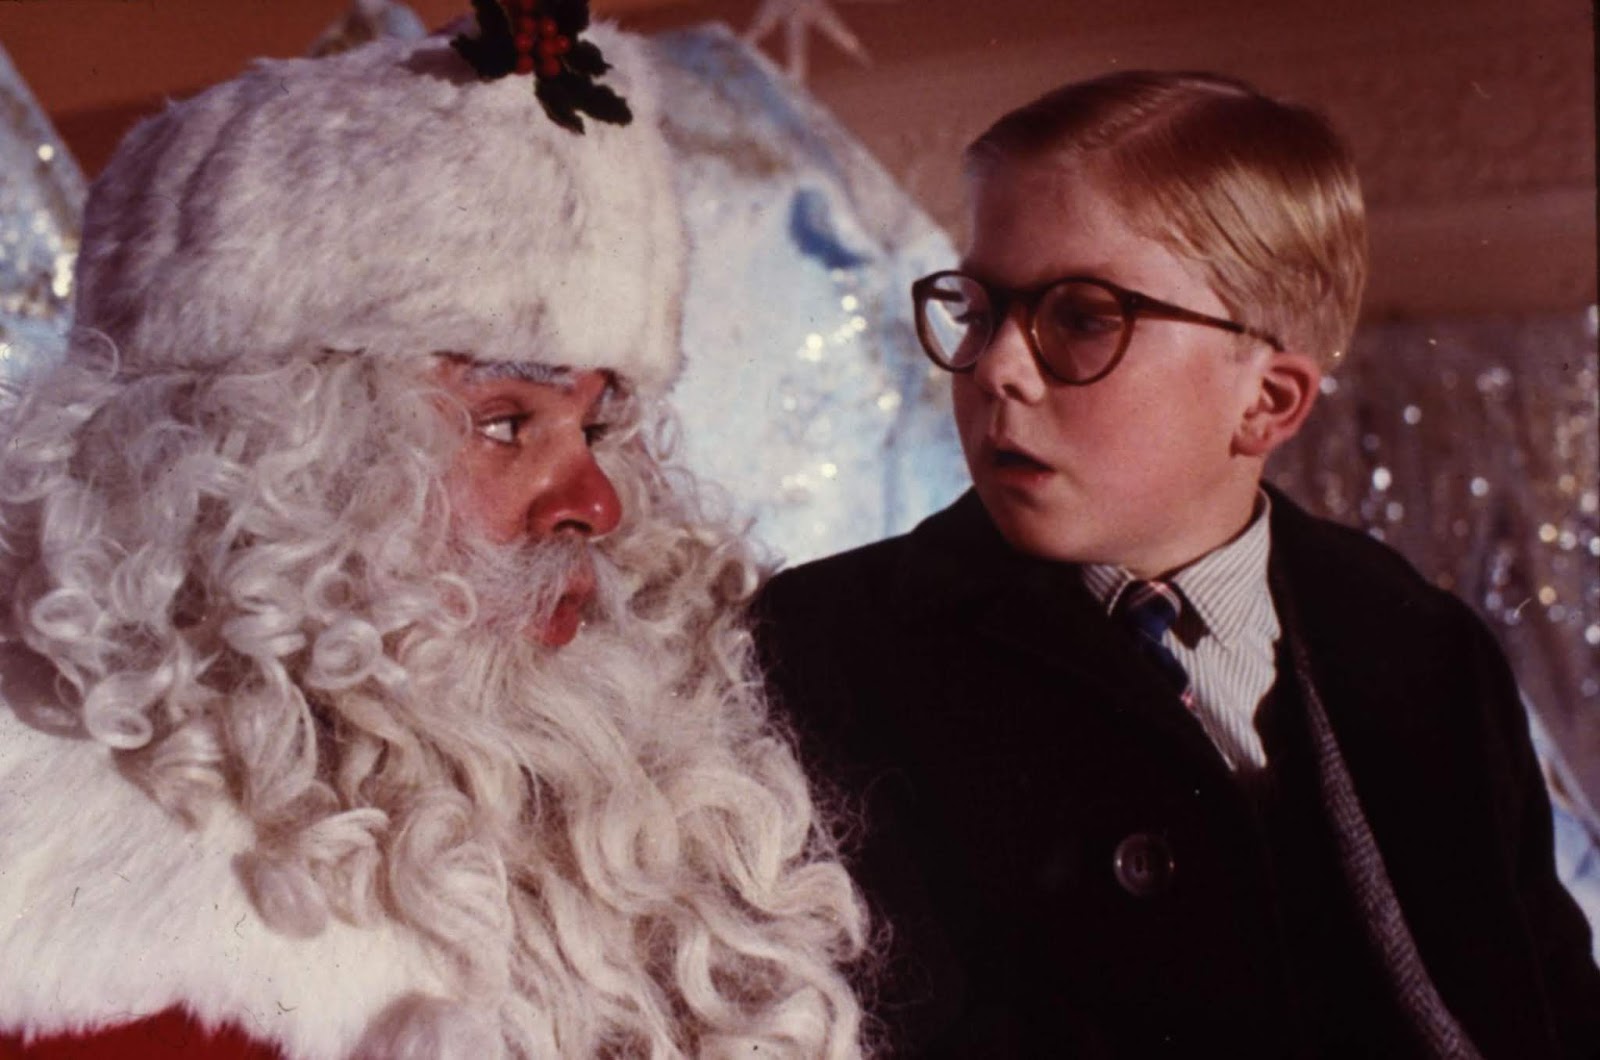 A Brief History of "A Christmas Story" and the TBS/TNT 24 hour marathon